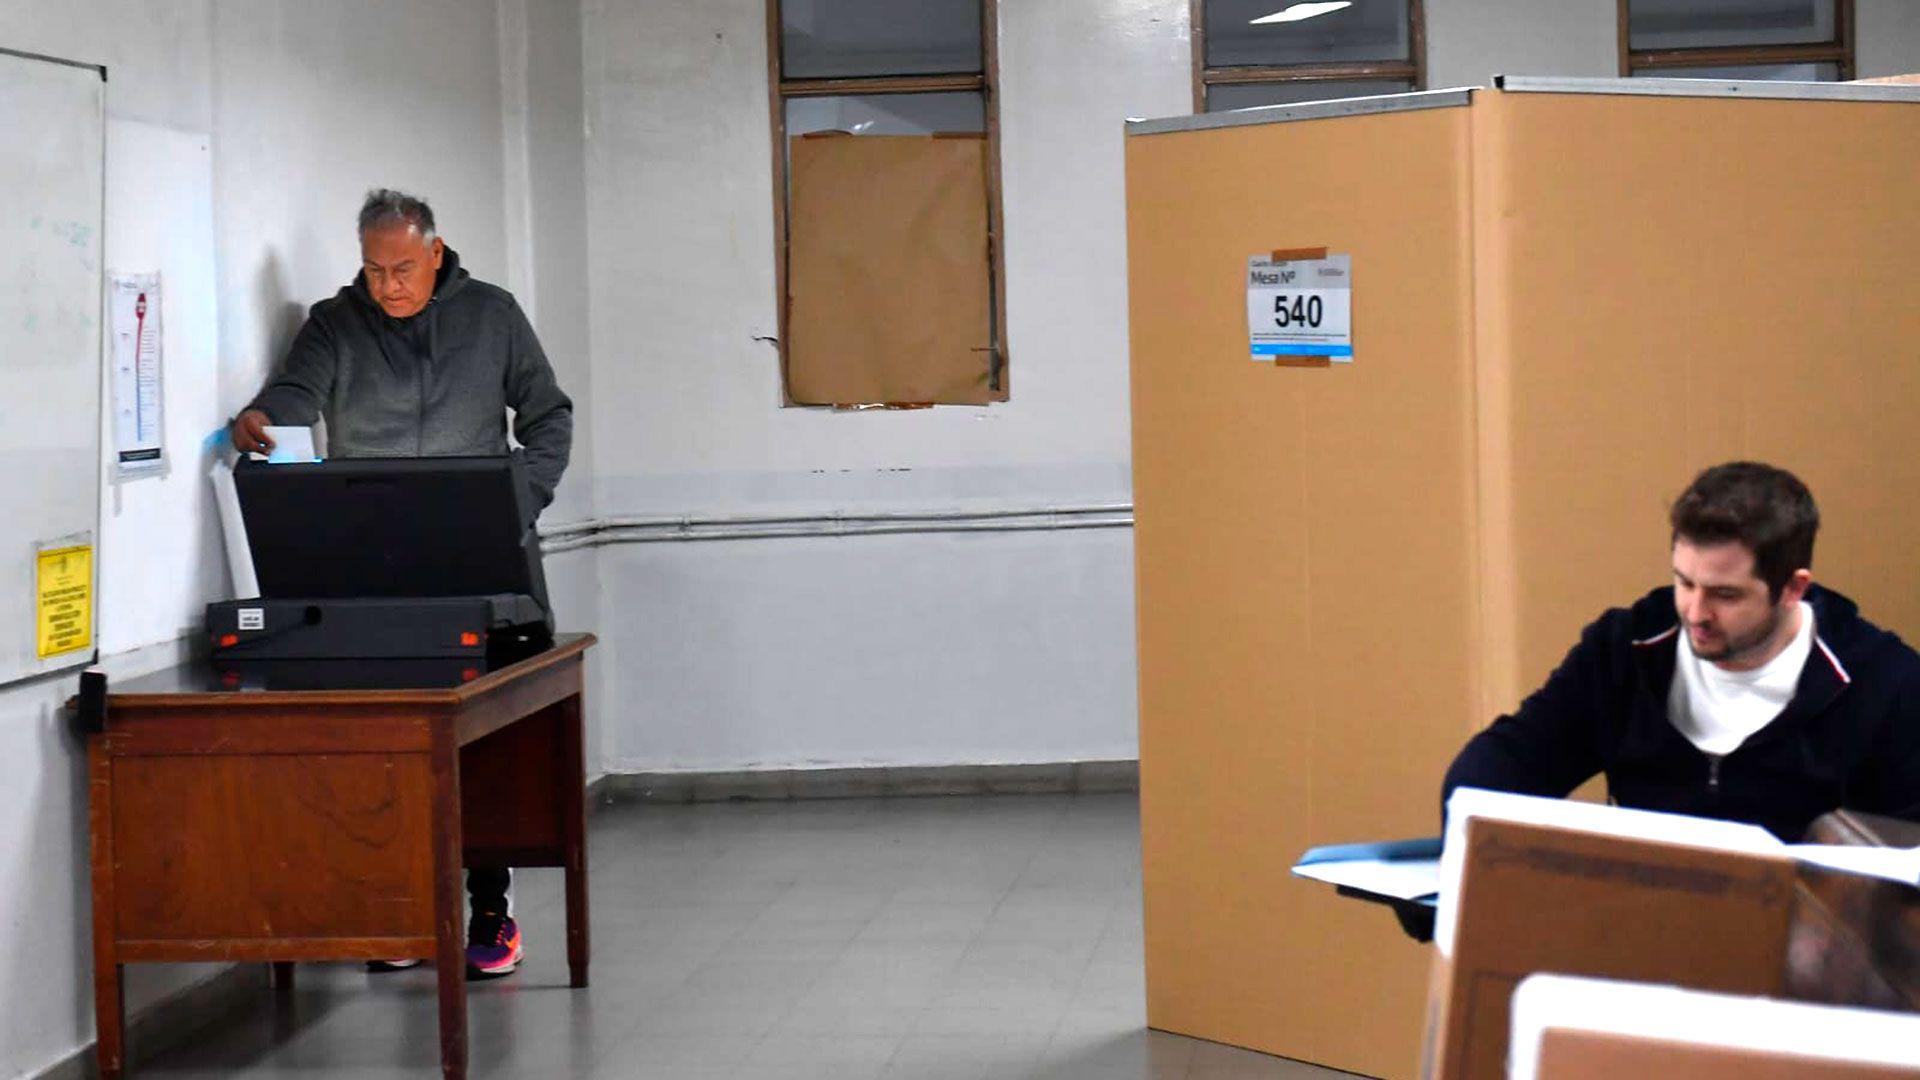 There were delays with the Single Electronic Ballot in CABA (Maximiliano Luna)